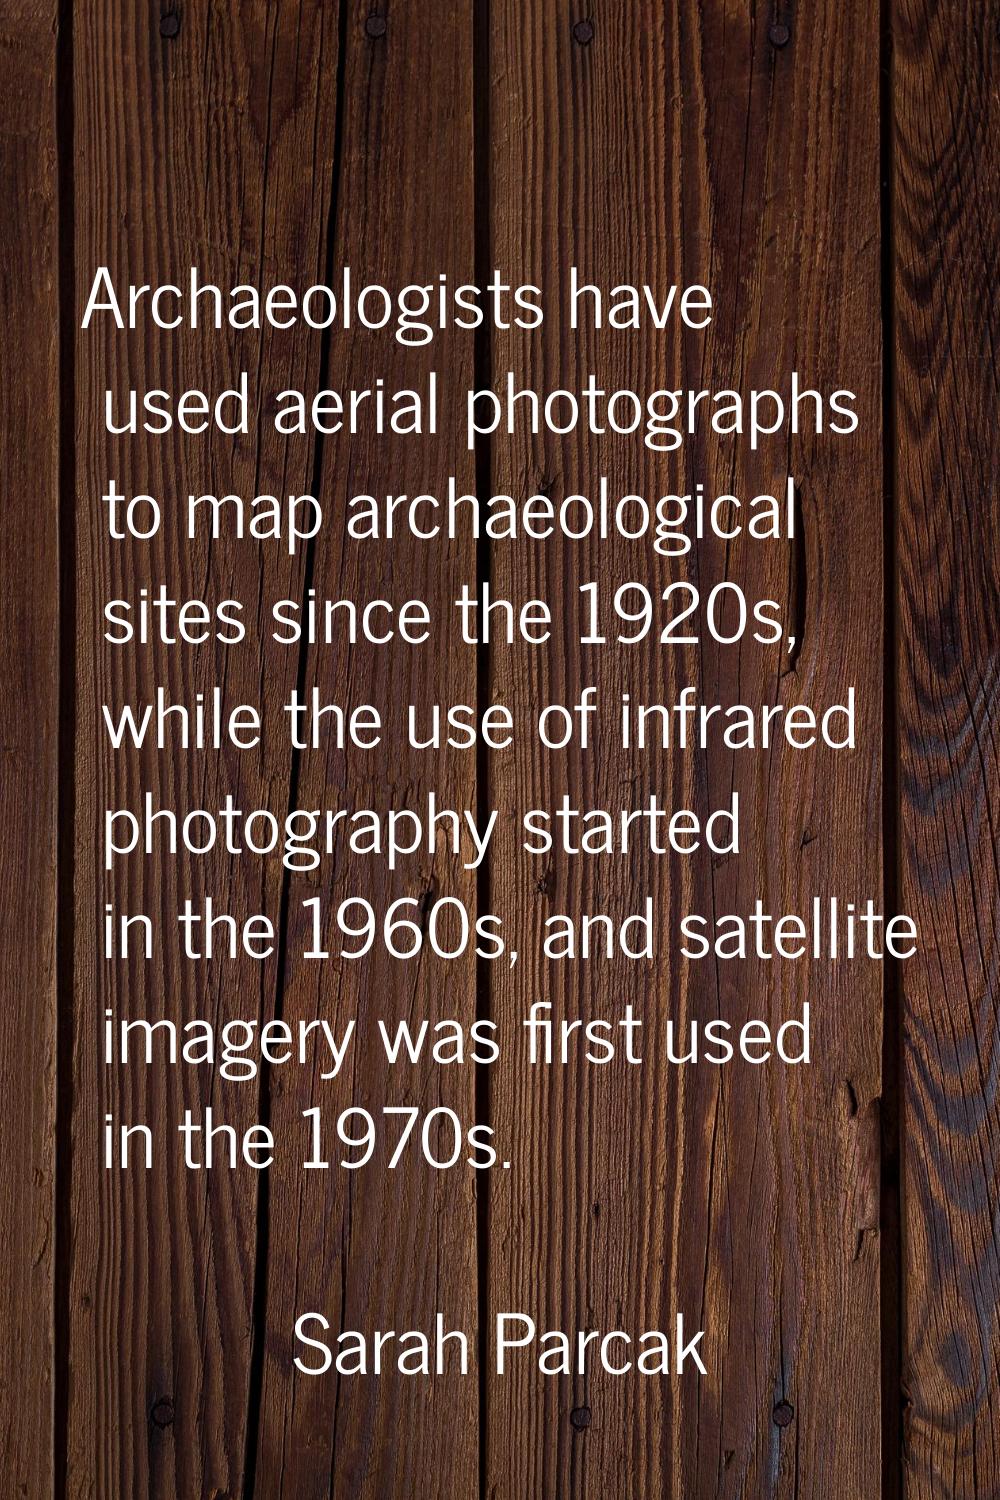 Archaeologists have used aerial photographs to map archaeological sites since the 1920s, while the 